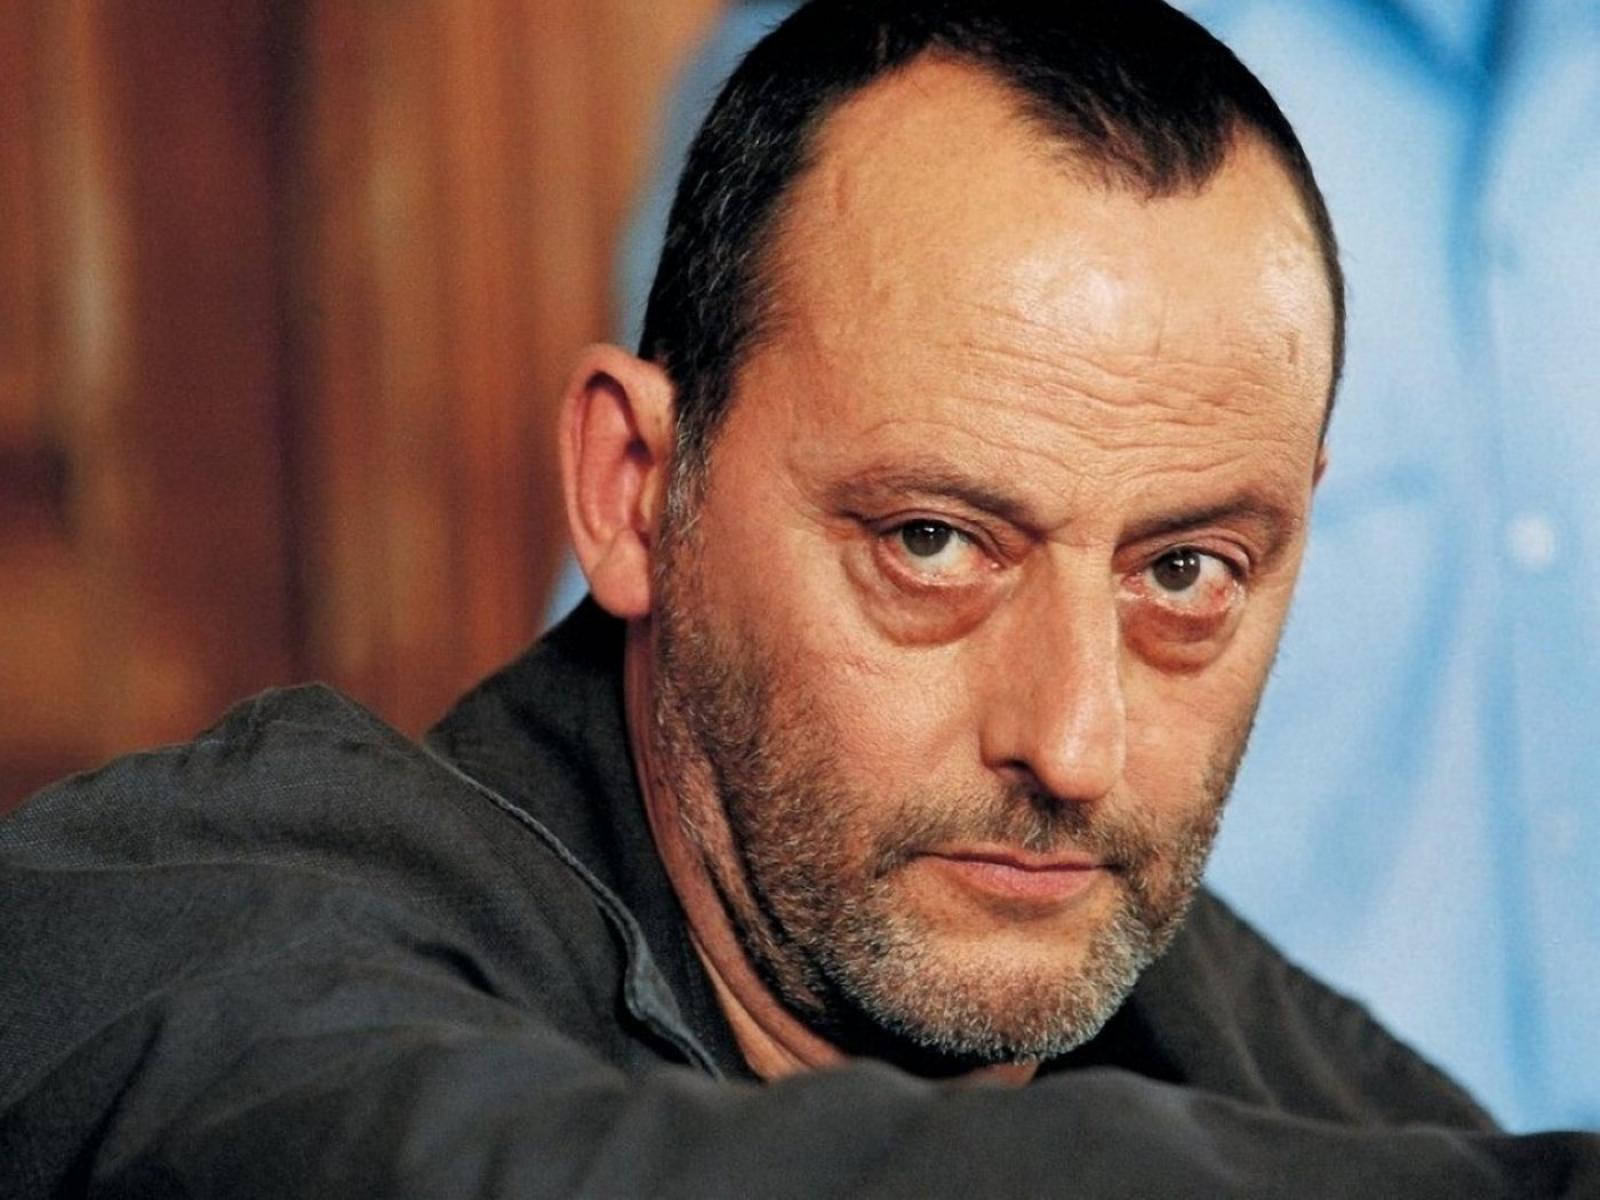 French actor Jean Reno in a scene from 'The Corsican File' movie. Wallpaper